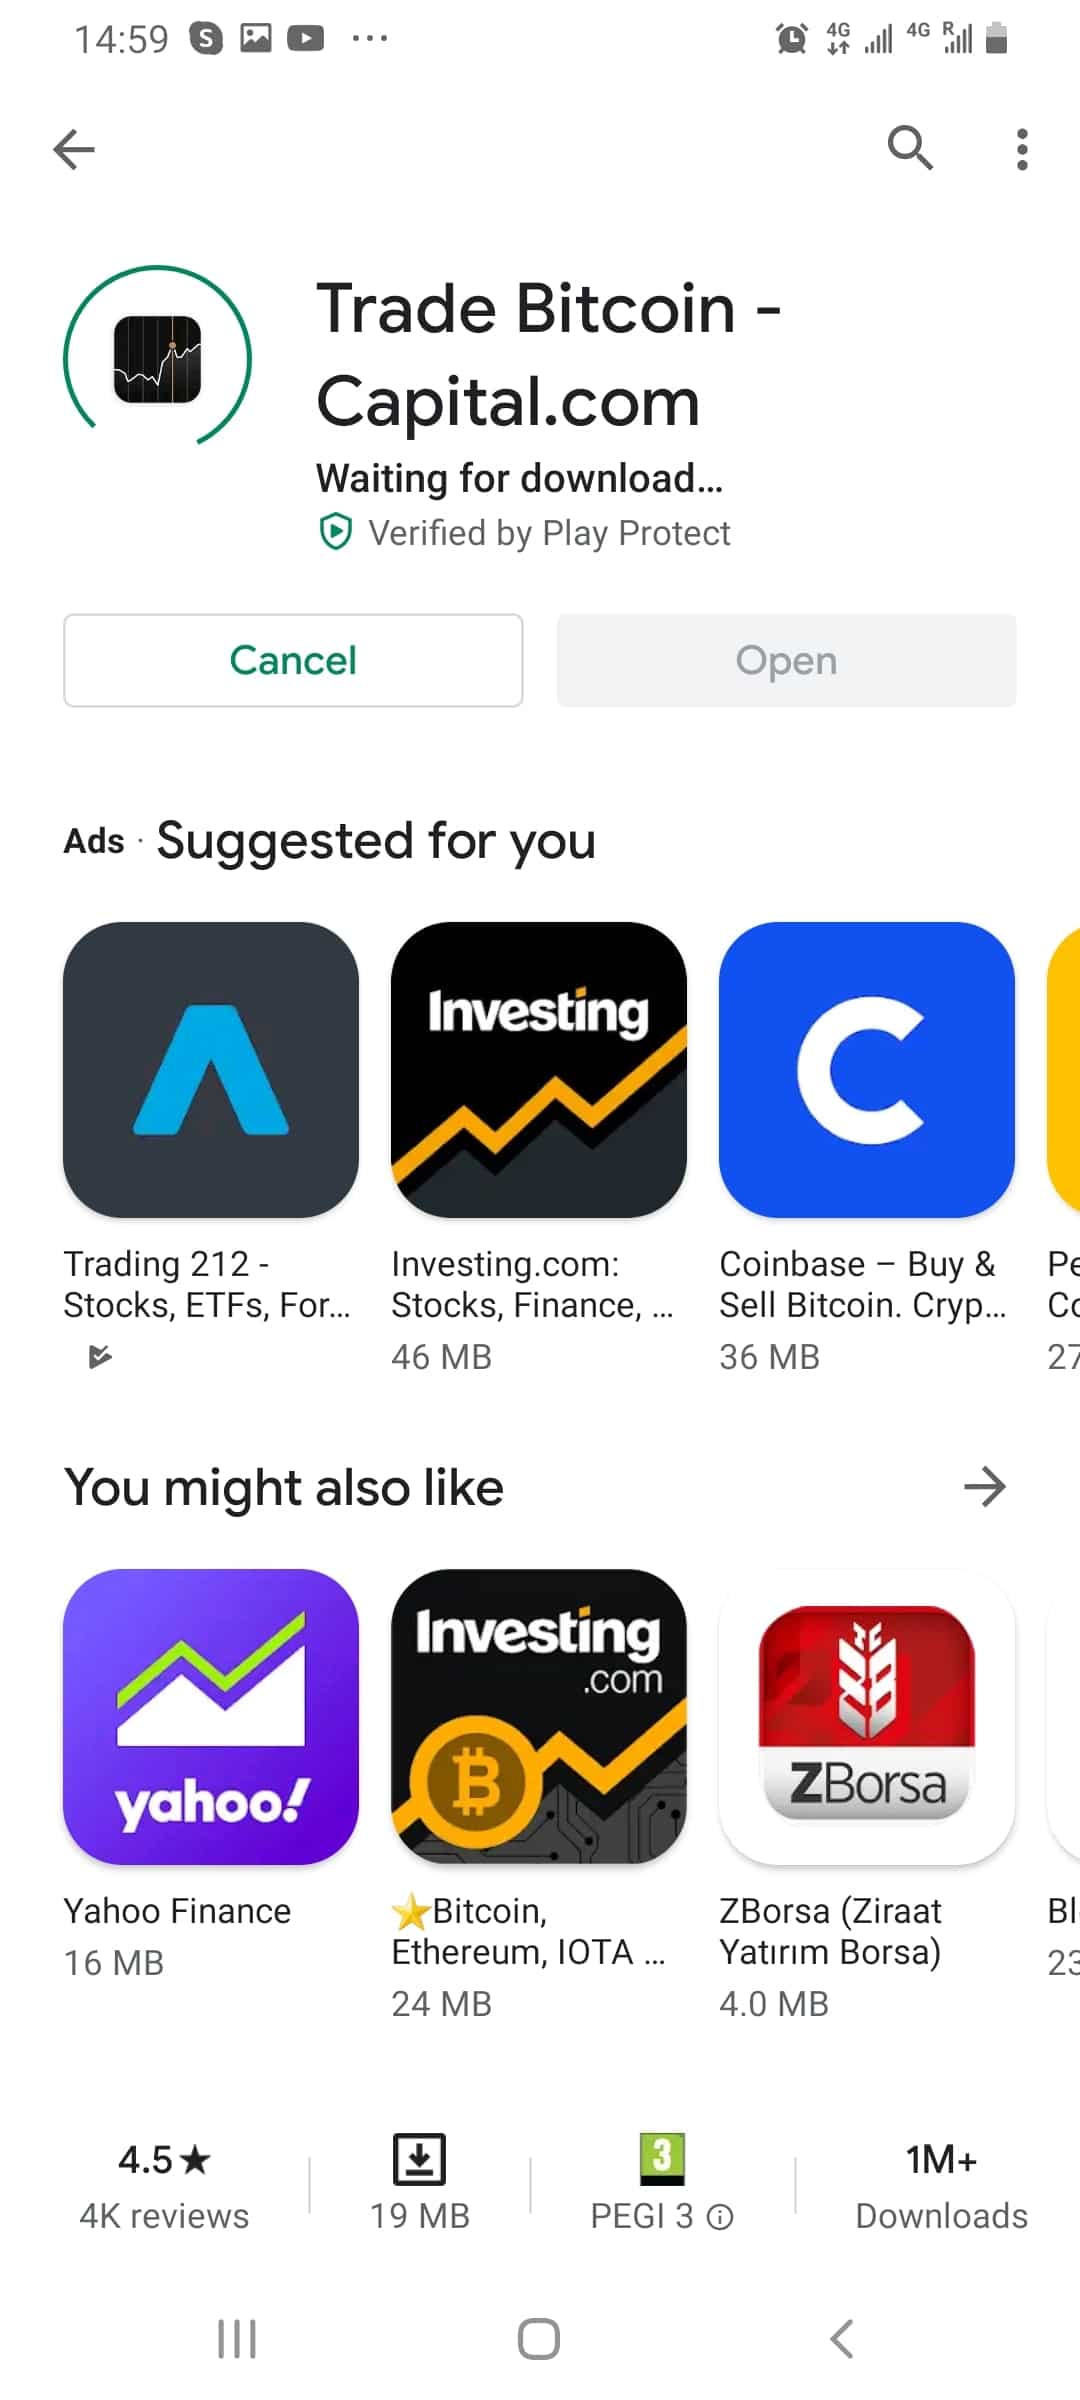 Best Forex Trading App May 2022 - Top Apps Revealed